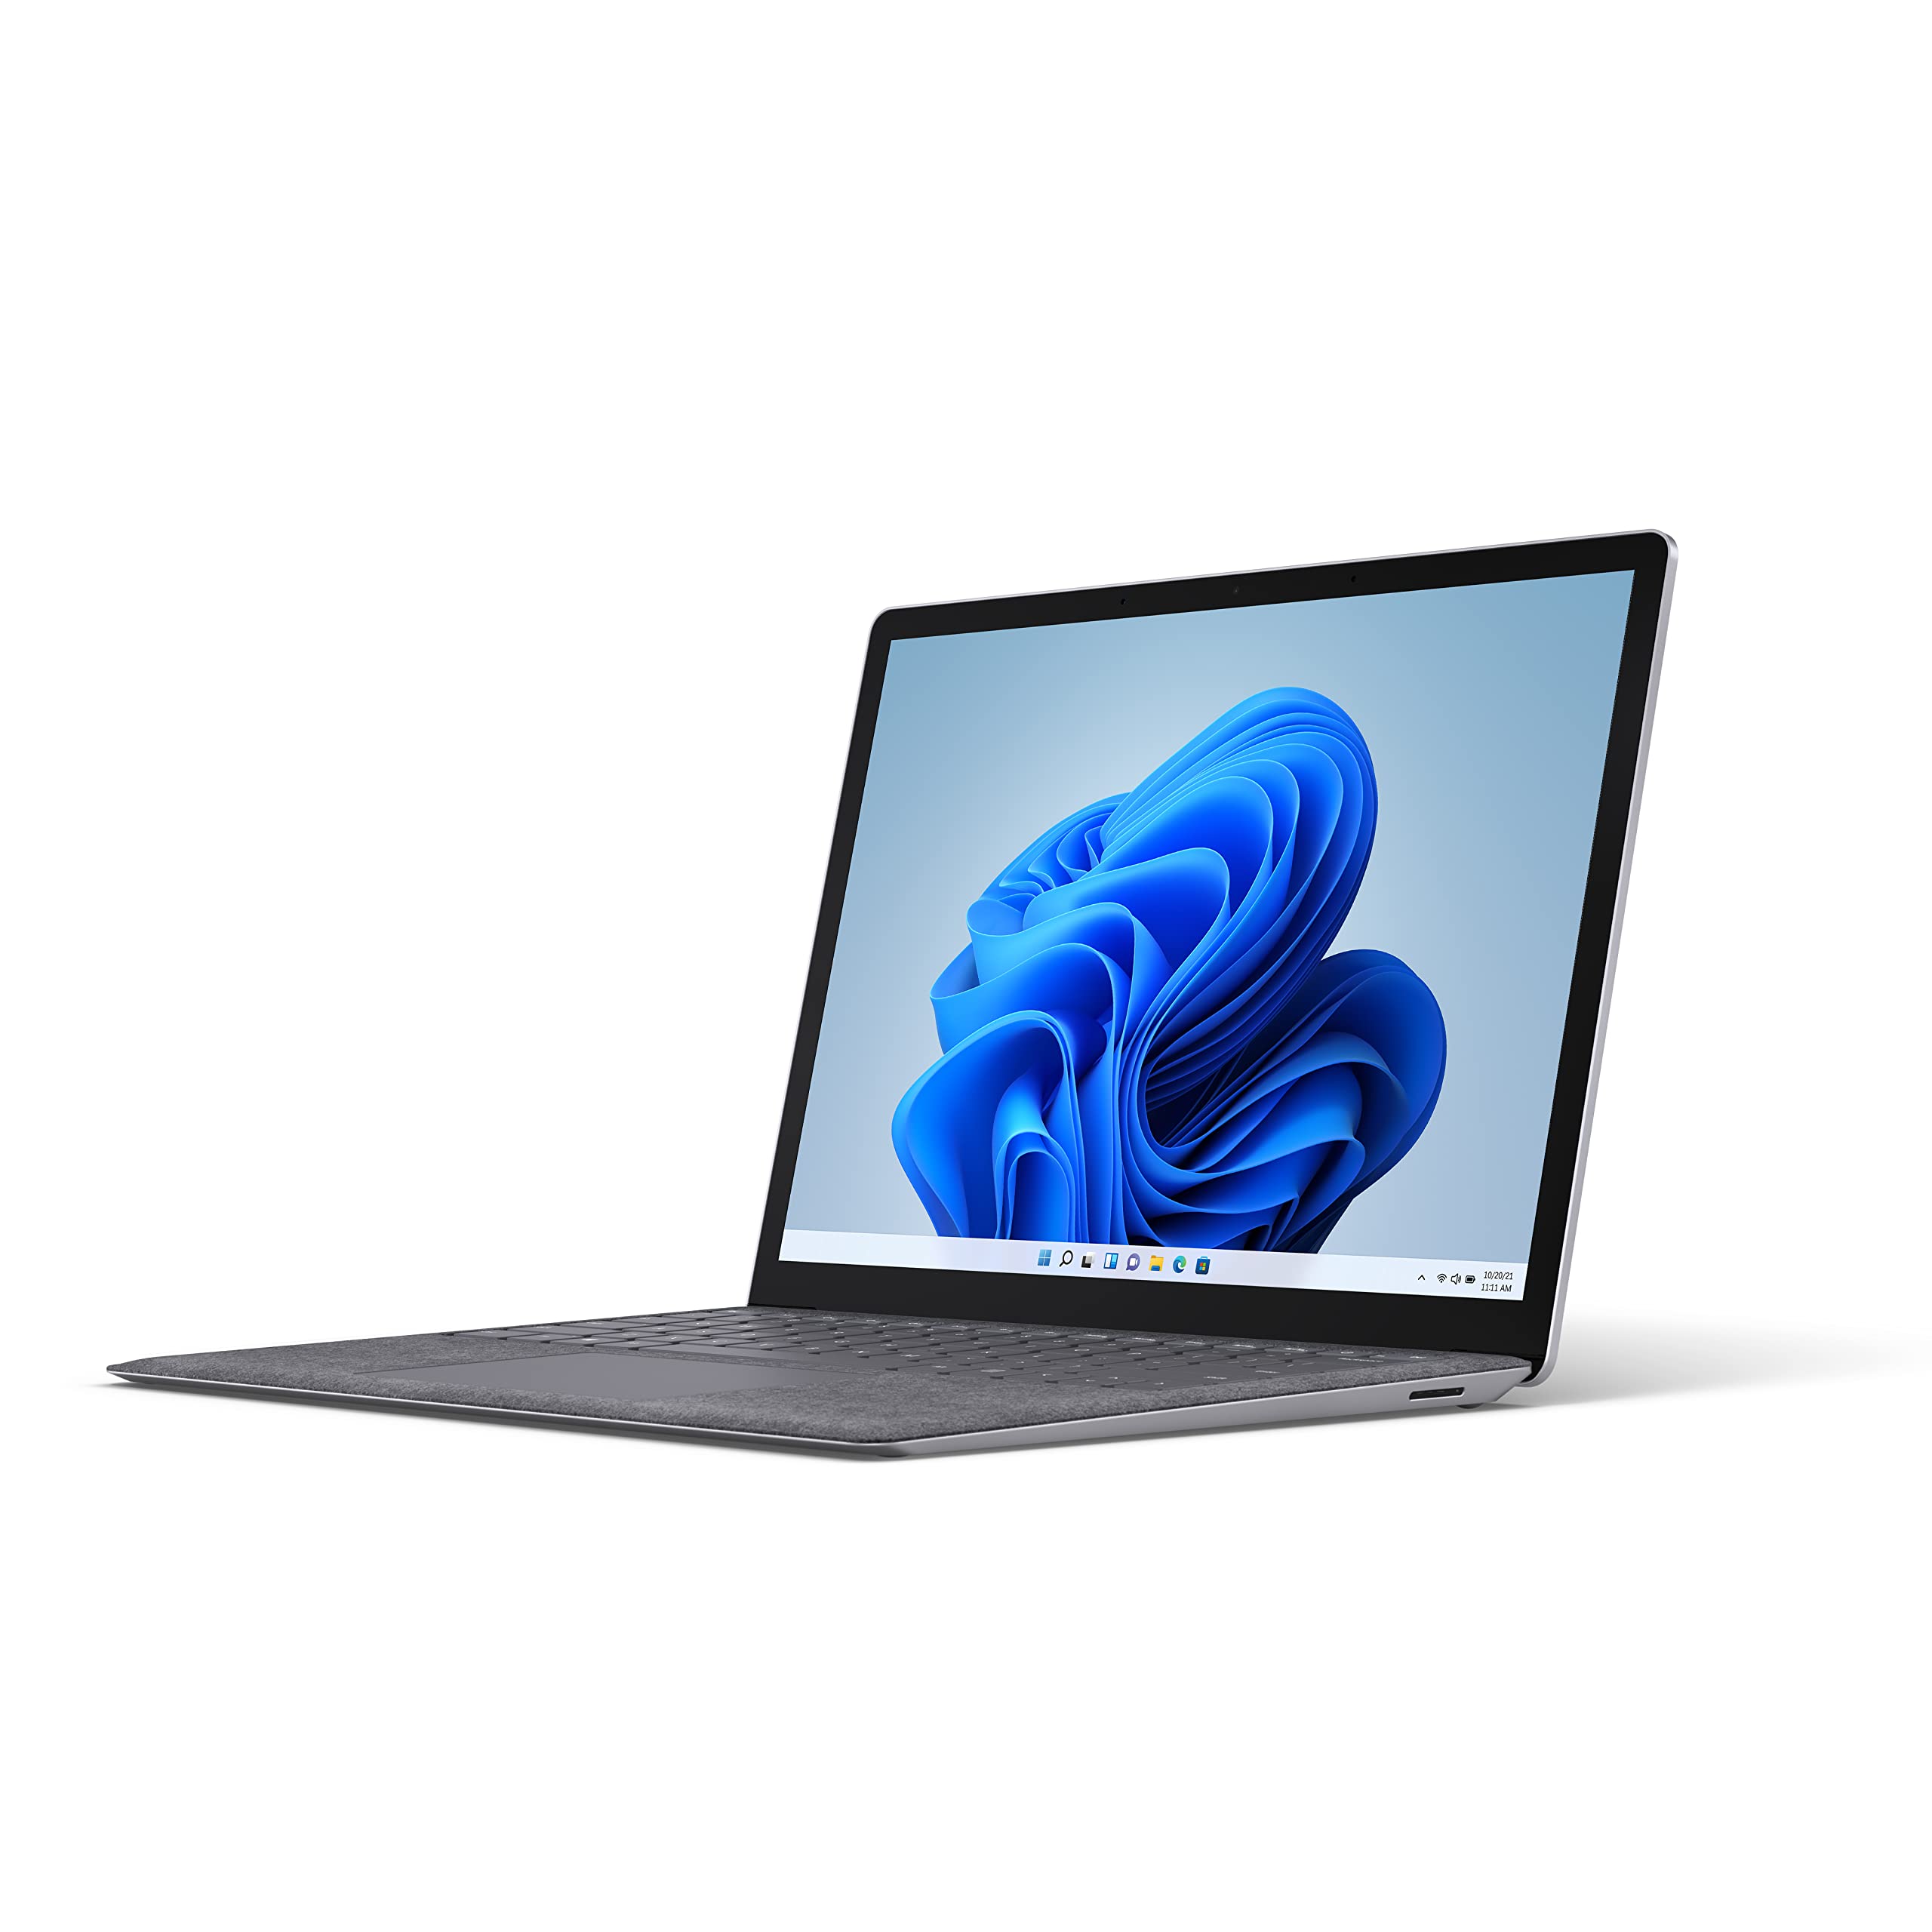 Microsoft Surface Laptop 4 13.5” Touch-Screen – AMD Ryzen 5 Surface Edition - 16GB Memory - 256GB Solid State Drive - Platinum